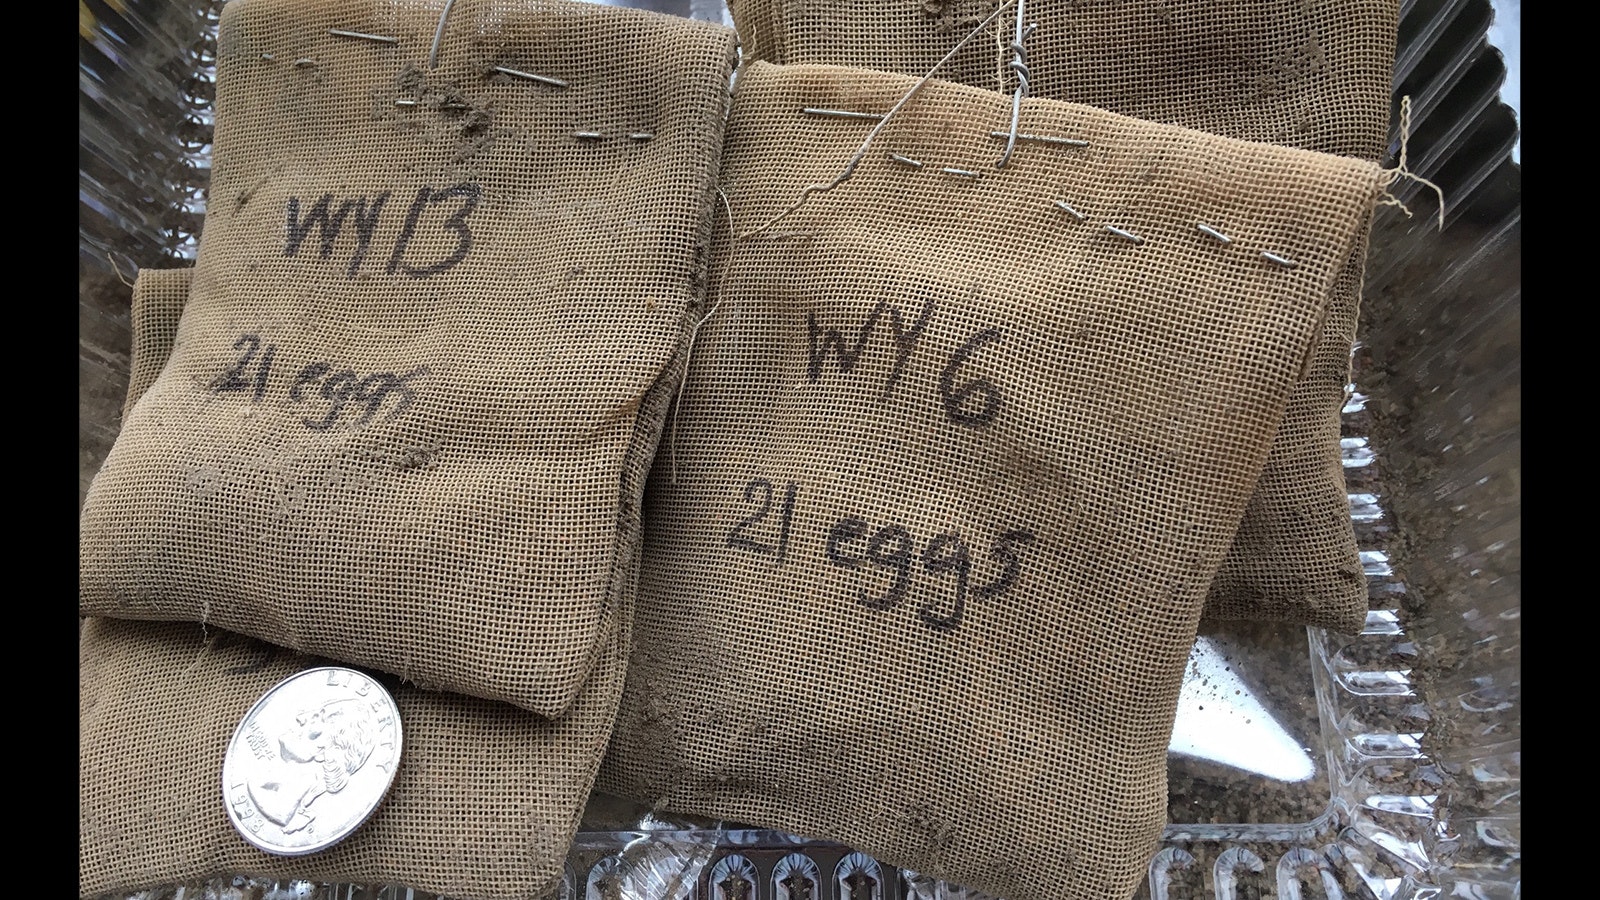 Plastic mesh egg bags like these have been buried in the Bighorns to study the hatching habits of Mormon crickets.